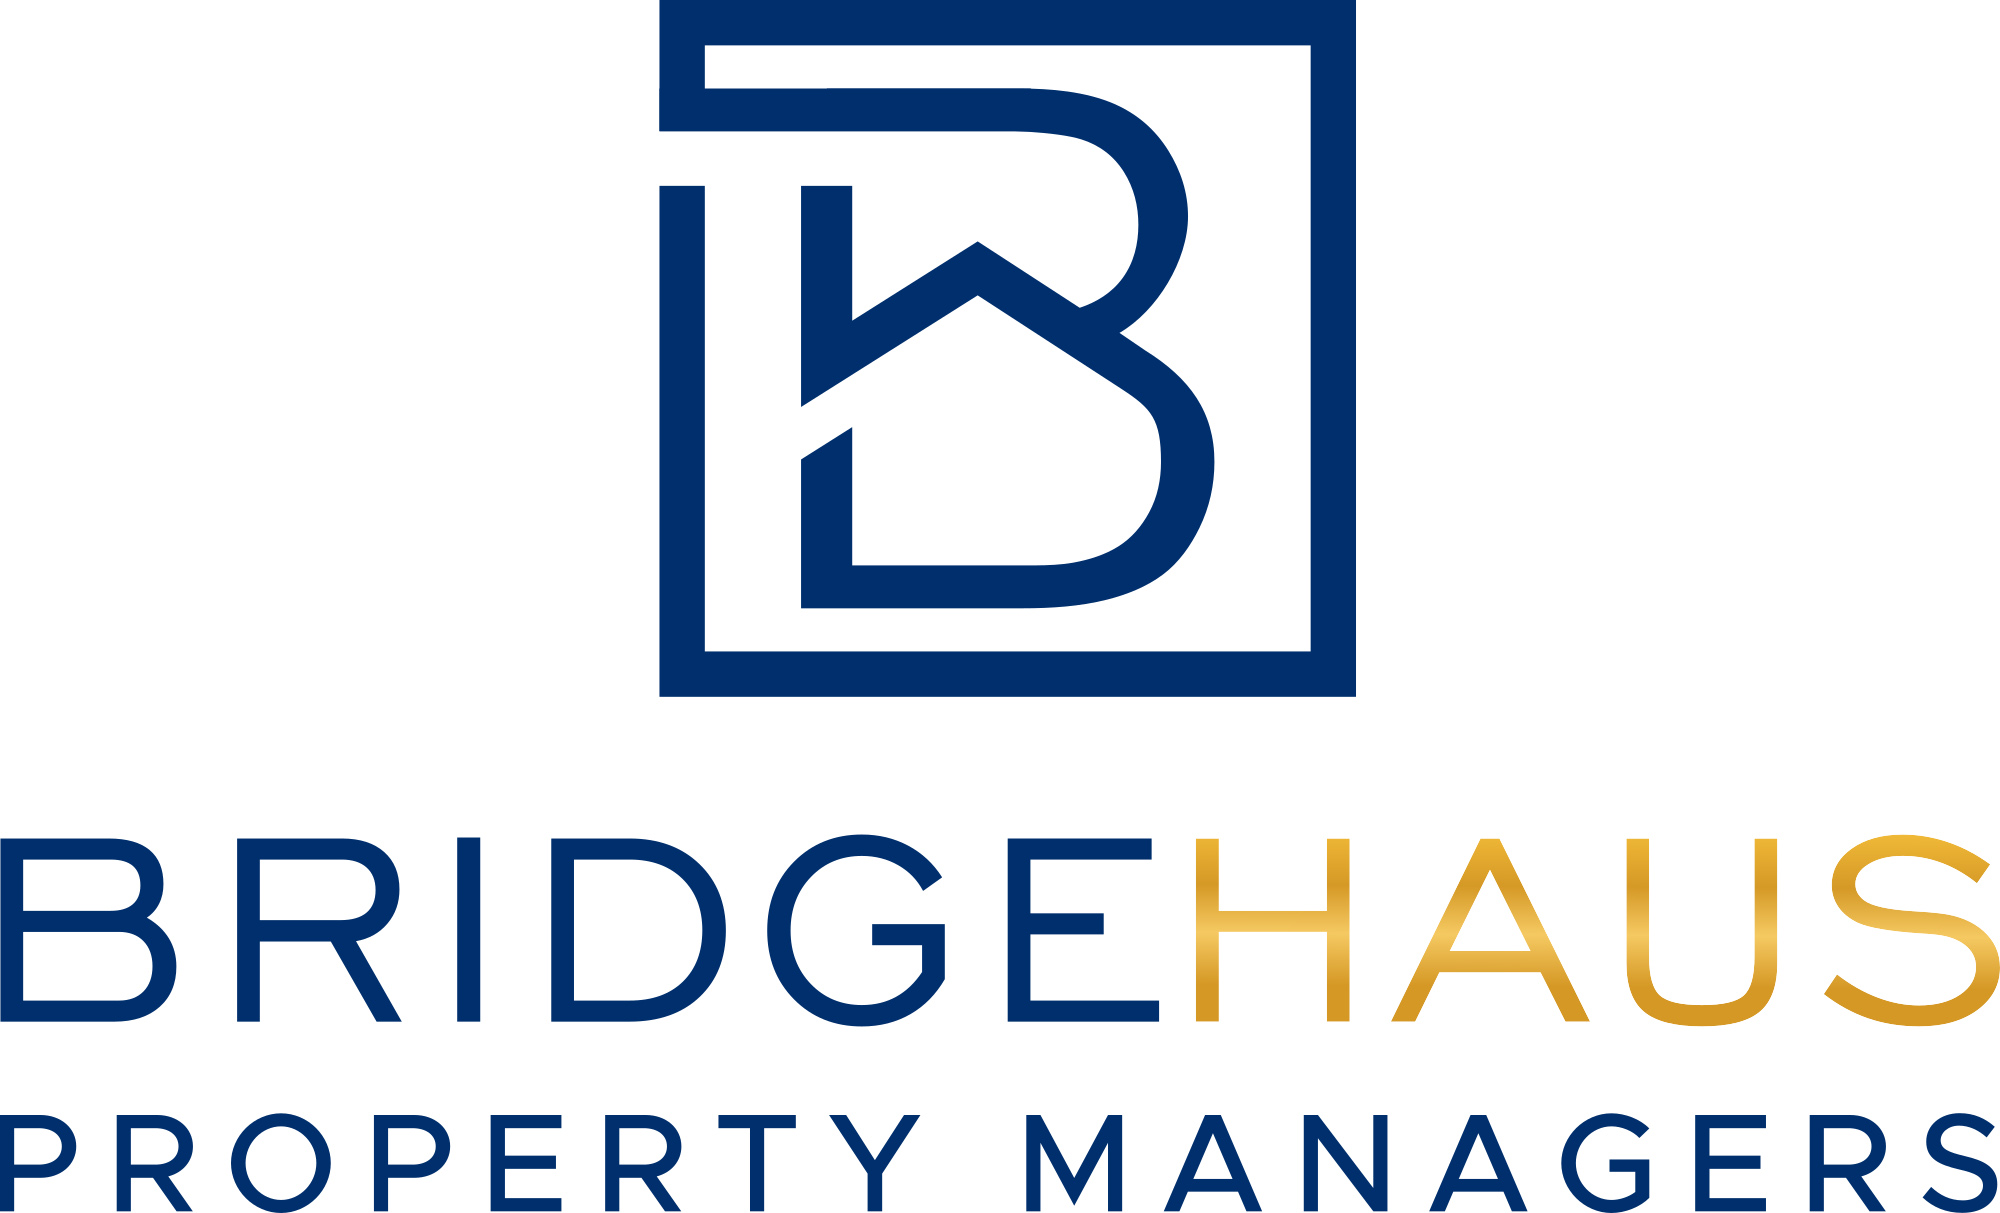 BridgeHaus Property Managers | San Diego, CA | Request A Free Quote